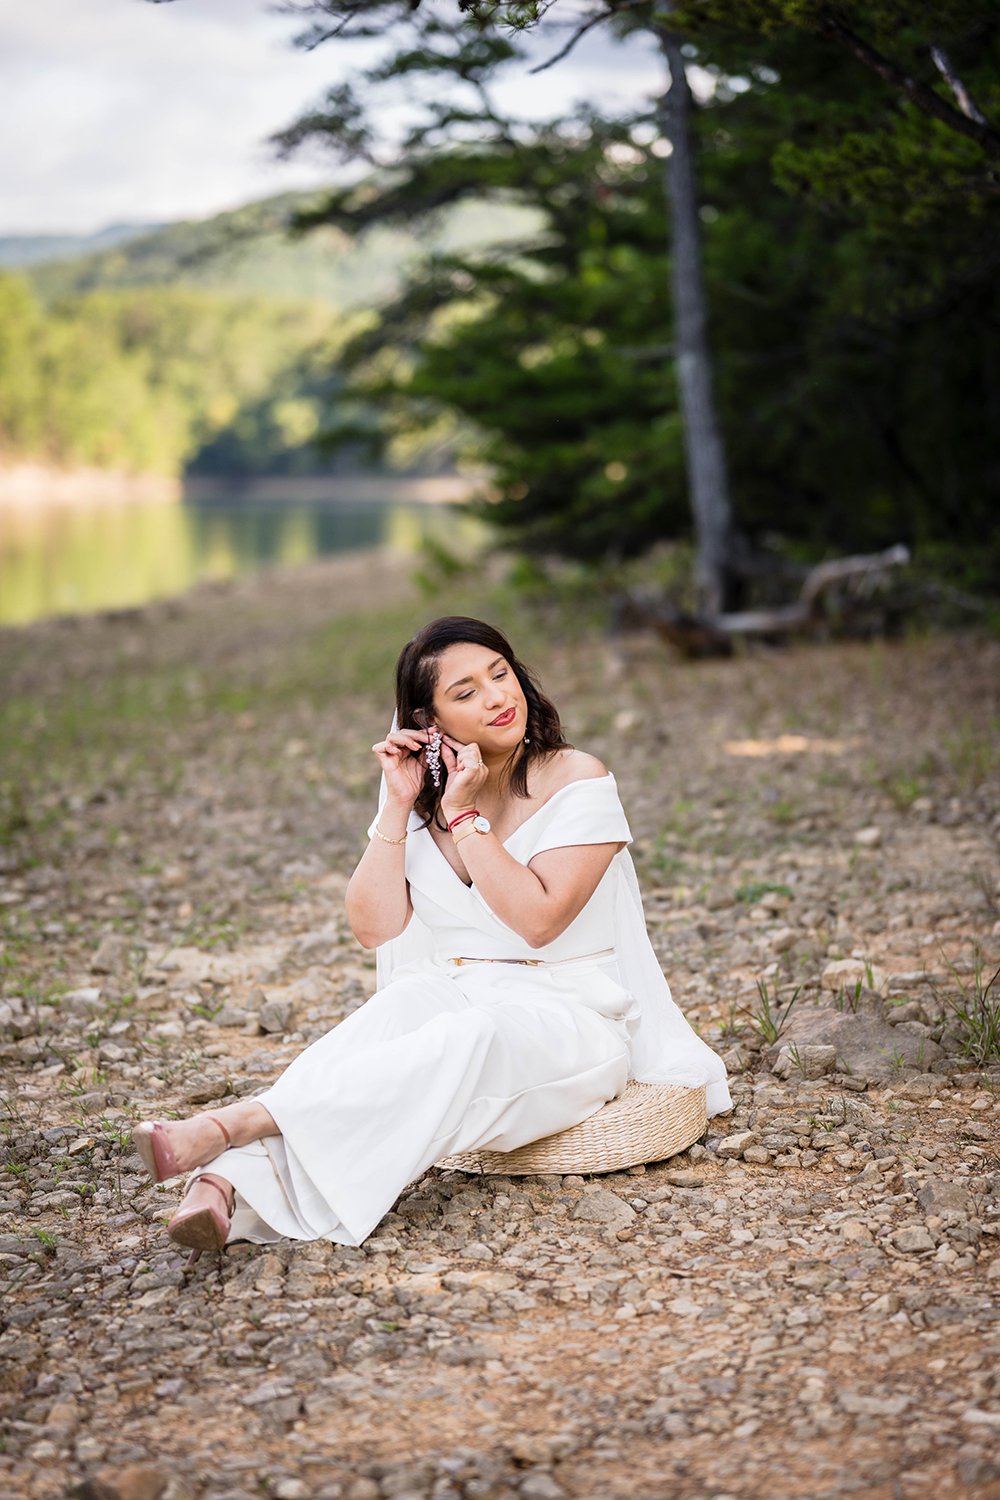 A bride on her elopement day sits on a round and close-to-the-ground wicker seat and adjusts her earring at Carvin's Cove, a location near the Blue Ridge Parkay.